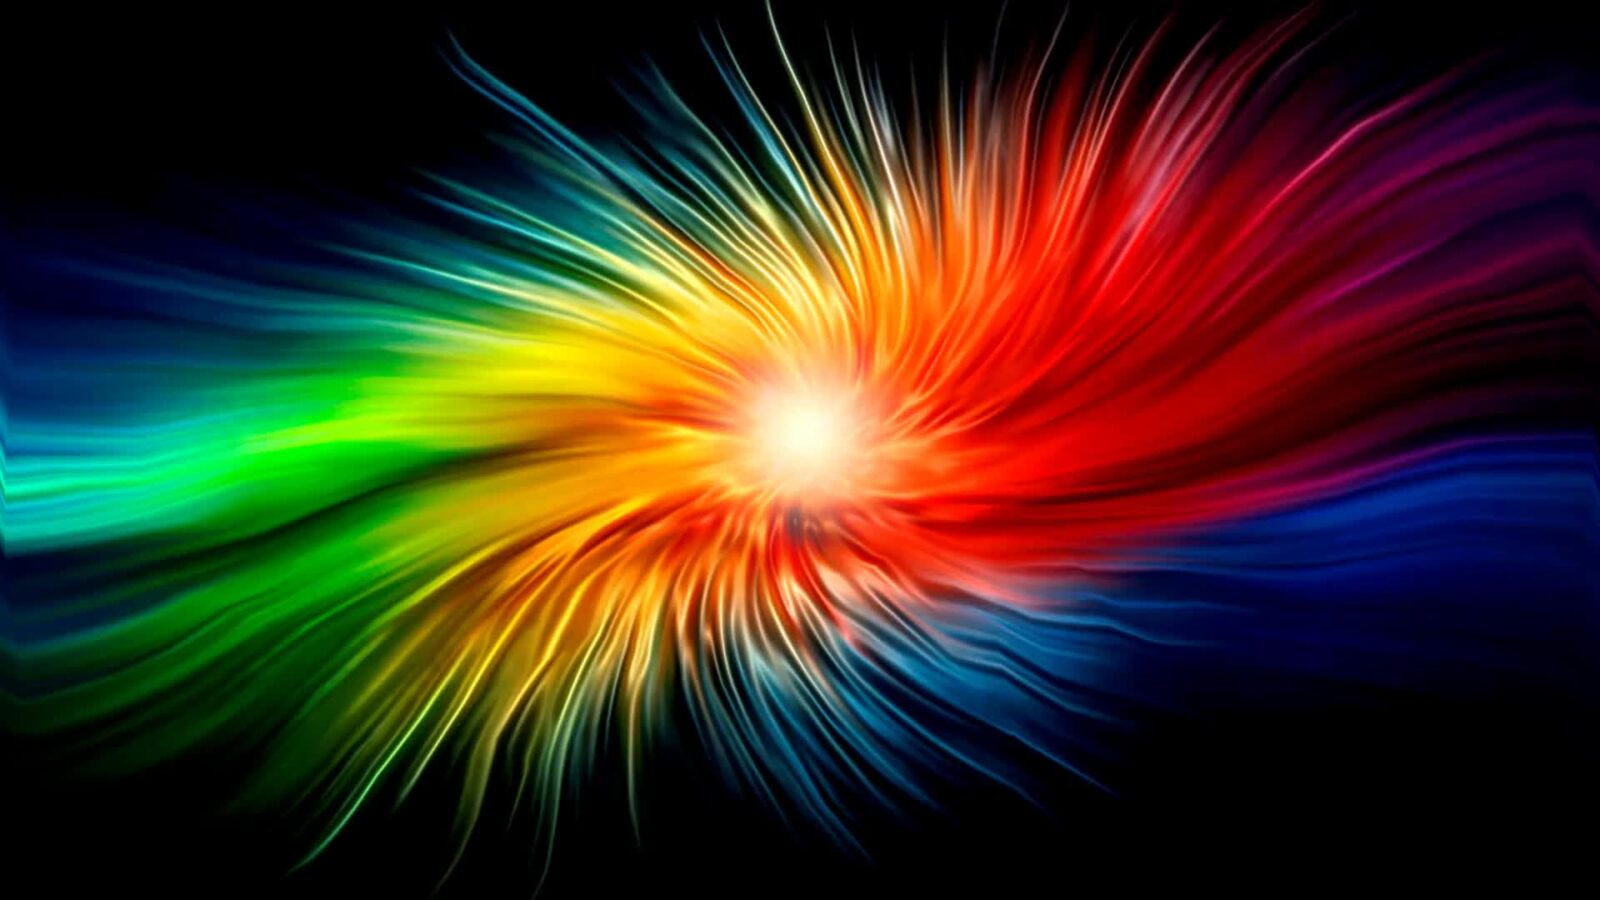 LiveWallpapers4Free.com | Cool Colorful Rainbow Abstract Art - Free Desktop Wallpaper